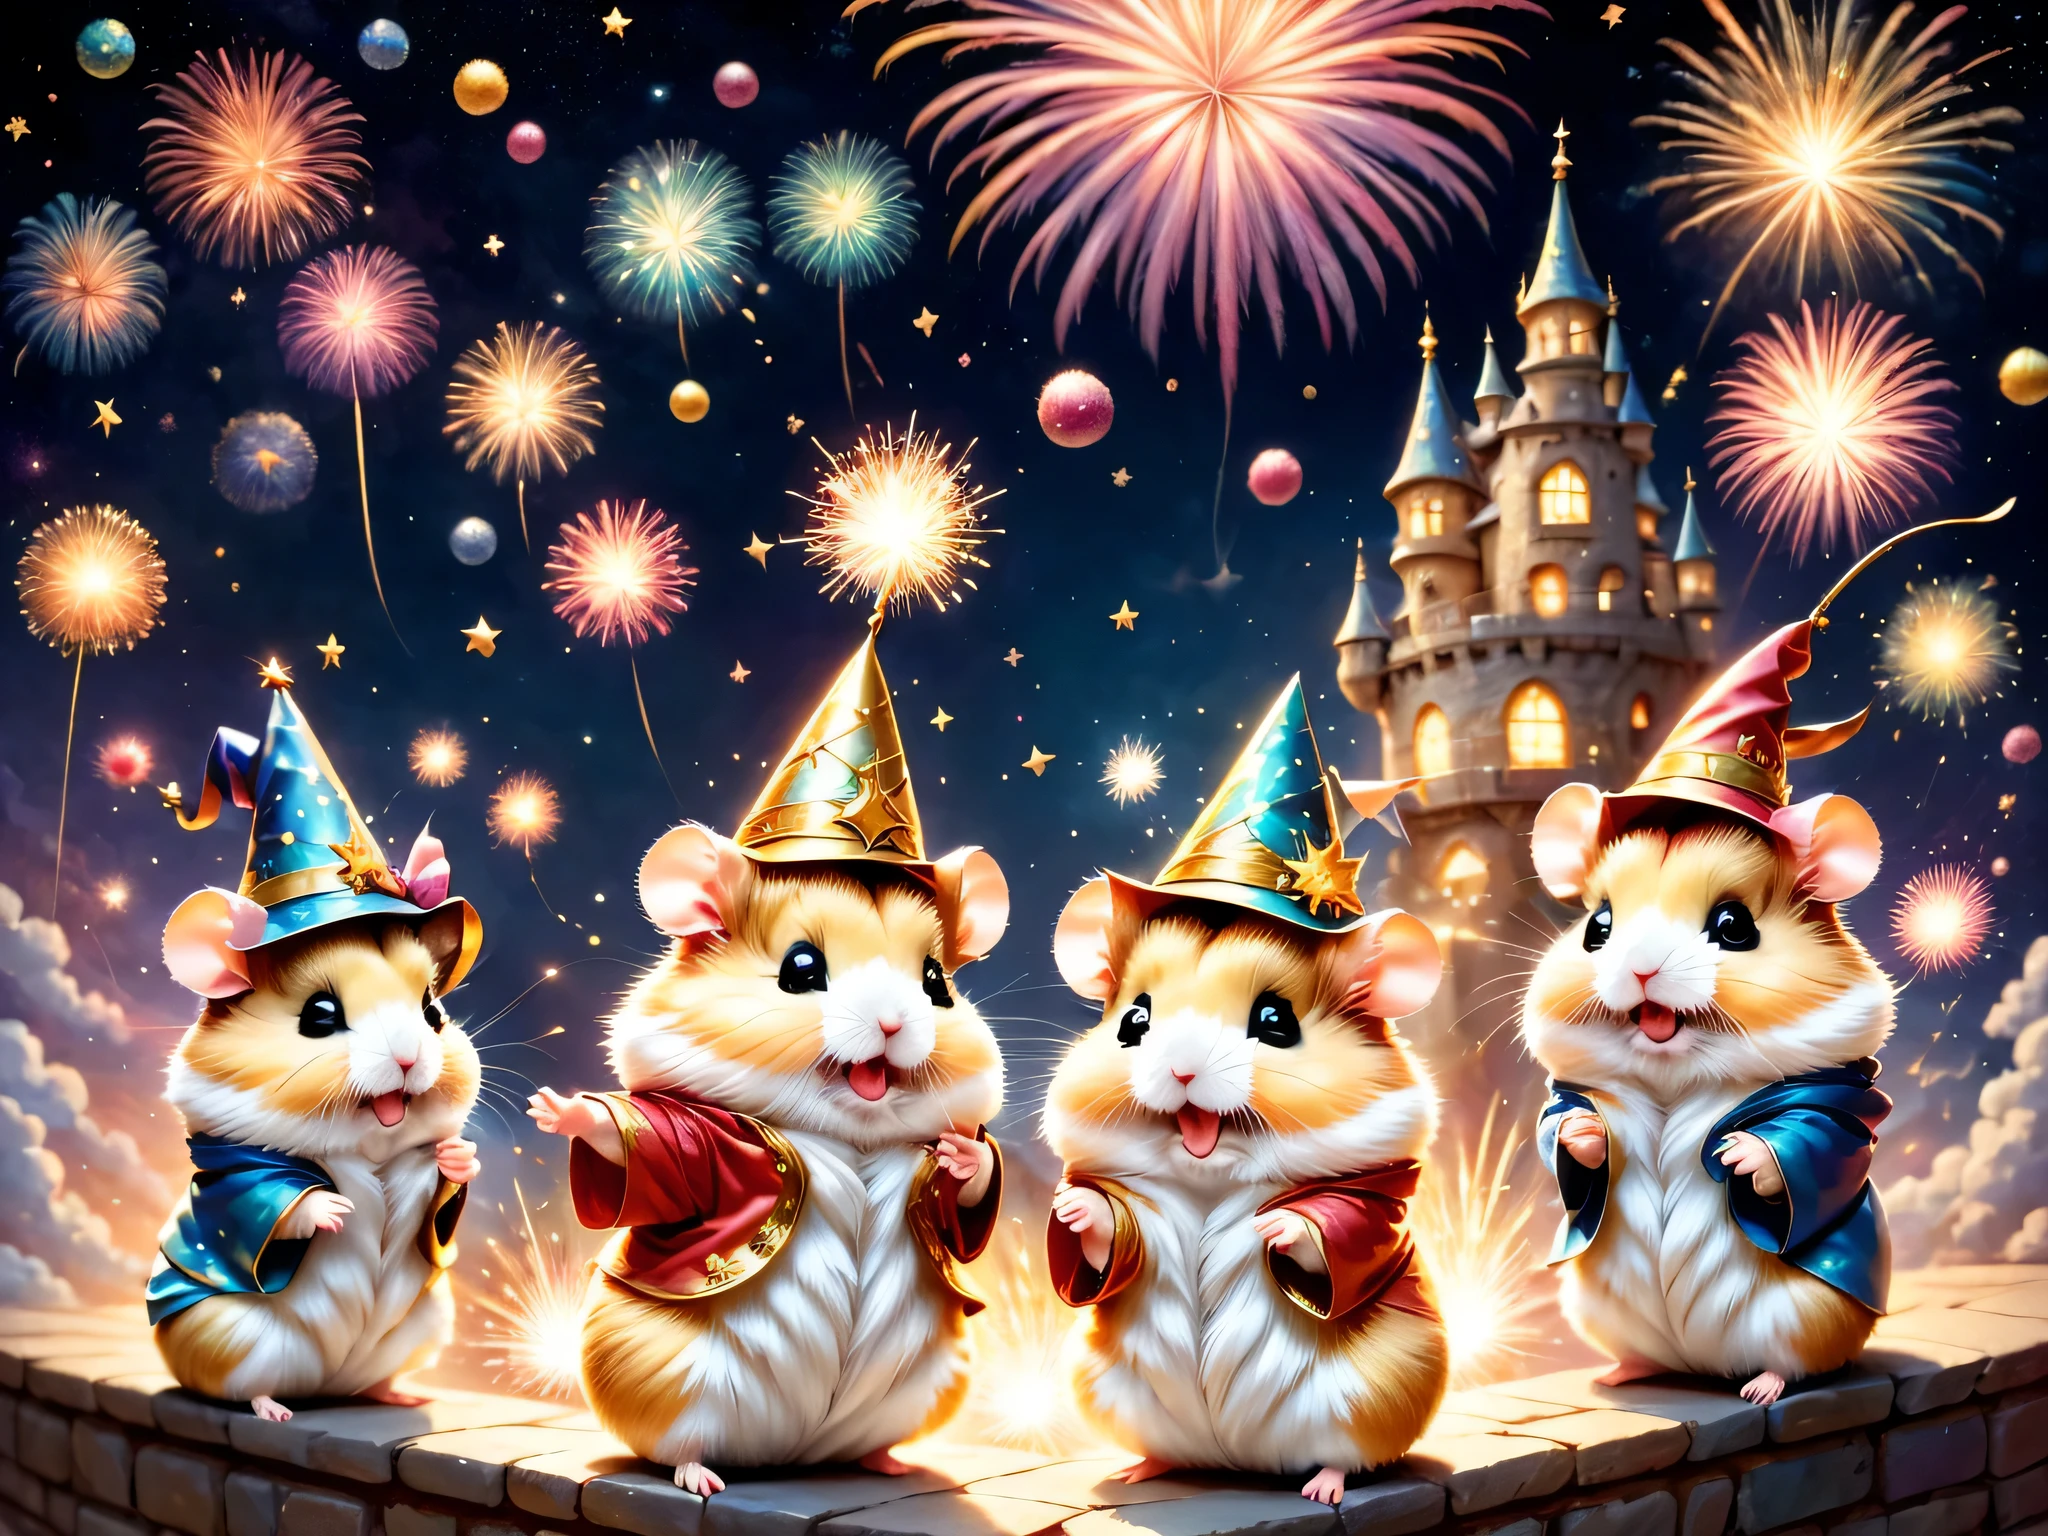 Sparkler,hamstania,festival,magic hamster party,((Hamster Wizard:great joy:raise your hand:open your mouth:jump:wizard&#39;s hat)),magic wand,,Wizard costume details:Colorful:draw a pattern with gold and silver,celebration,((空にはたくさんのSparklerがあがりました:Colorful)),,,castle balcony,lots of stars,about,Beautiful light effect,,masterpiece,highest quality,fluffy hamster,Chibi,cute,fun,happiness,,magic light,,Fantastic,Colorfulな空の詳細,anatomically correct,all the best,,Little hamster,最高にcuteハムスター，fantasy,randolph caldecott style,enlightenment,watercolor painting,